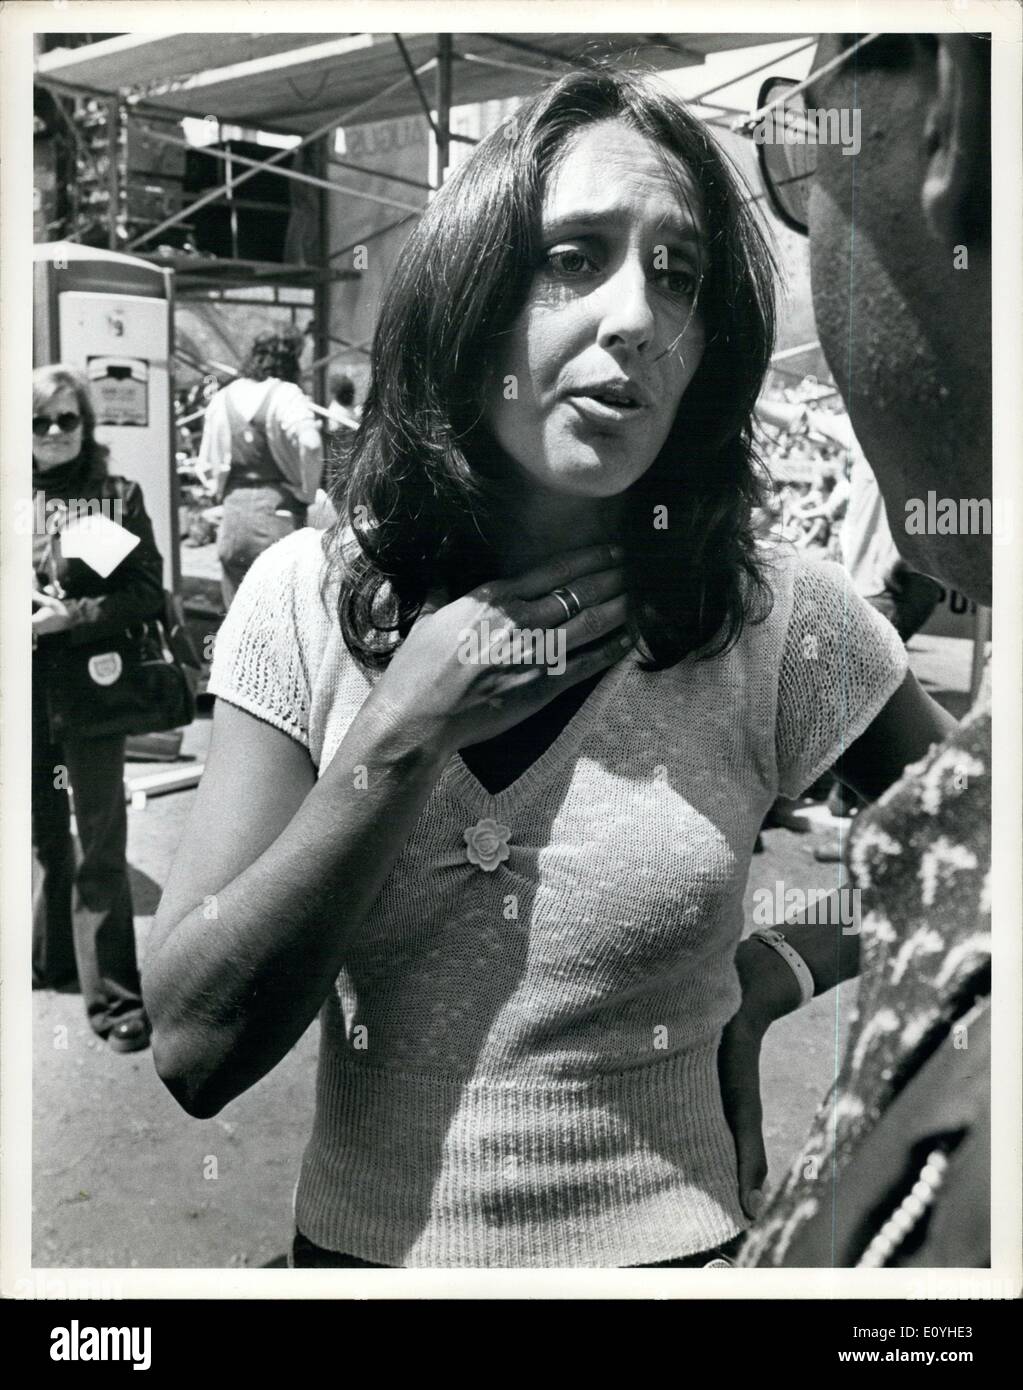 Jun 01, 1970 - JOAN BAEZ is an American folk singer, songwriter, musician, and a prominent activist. (exact date and location unknown) Stock Photo